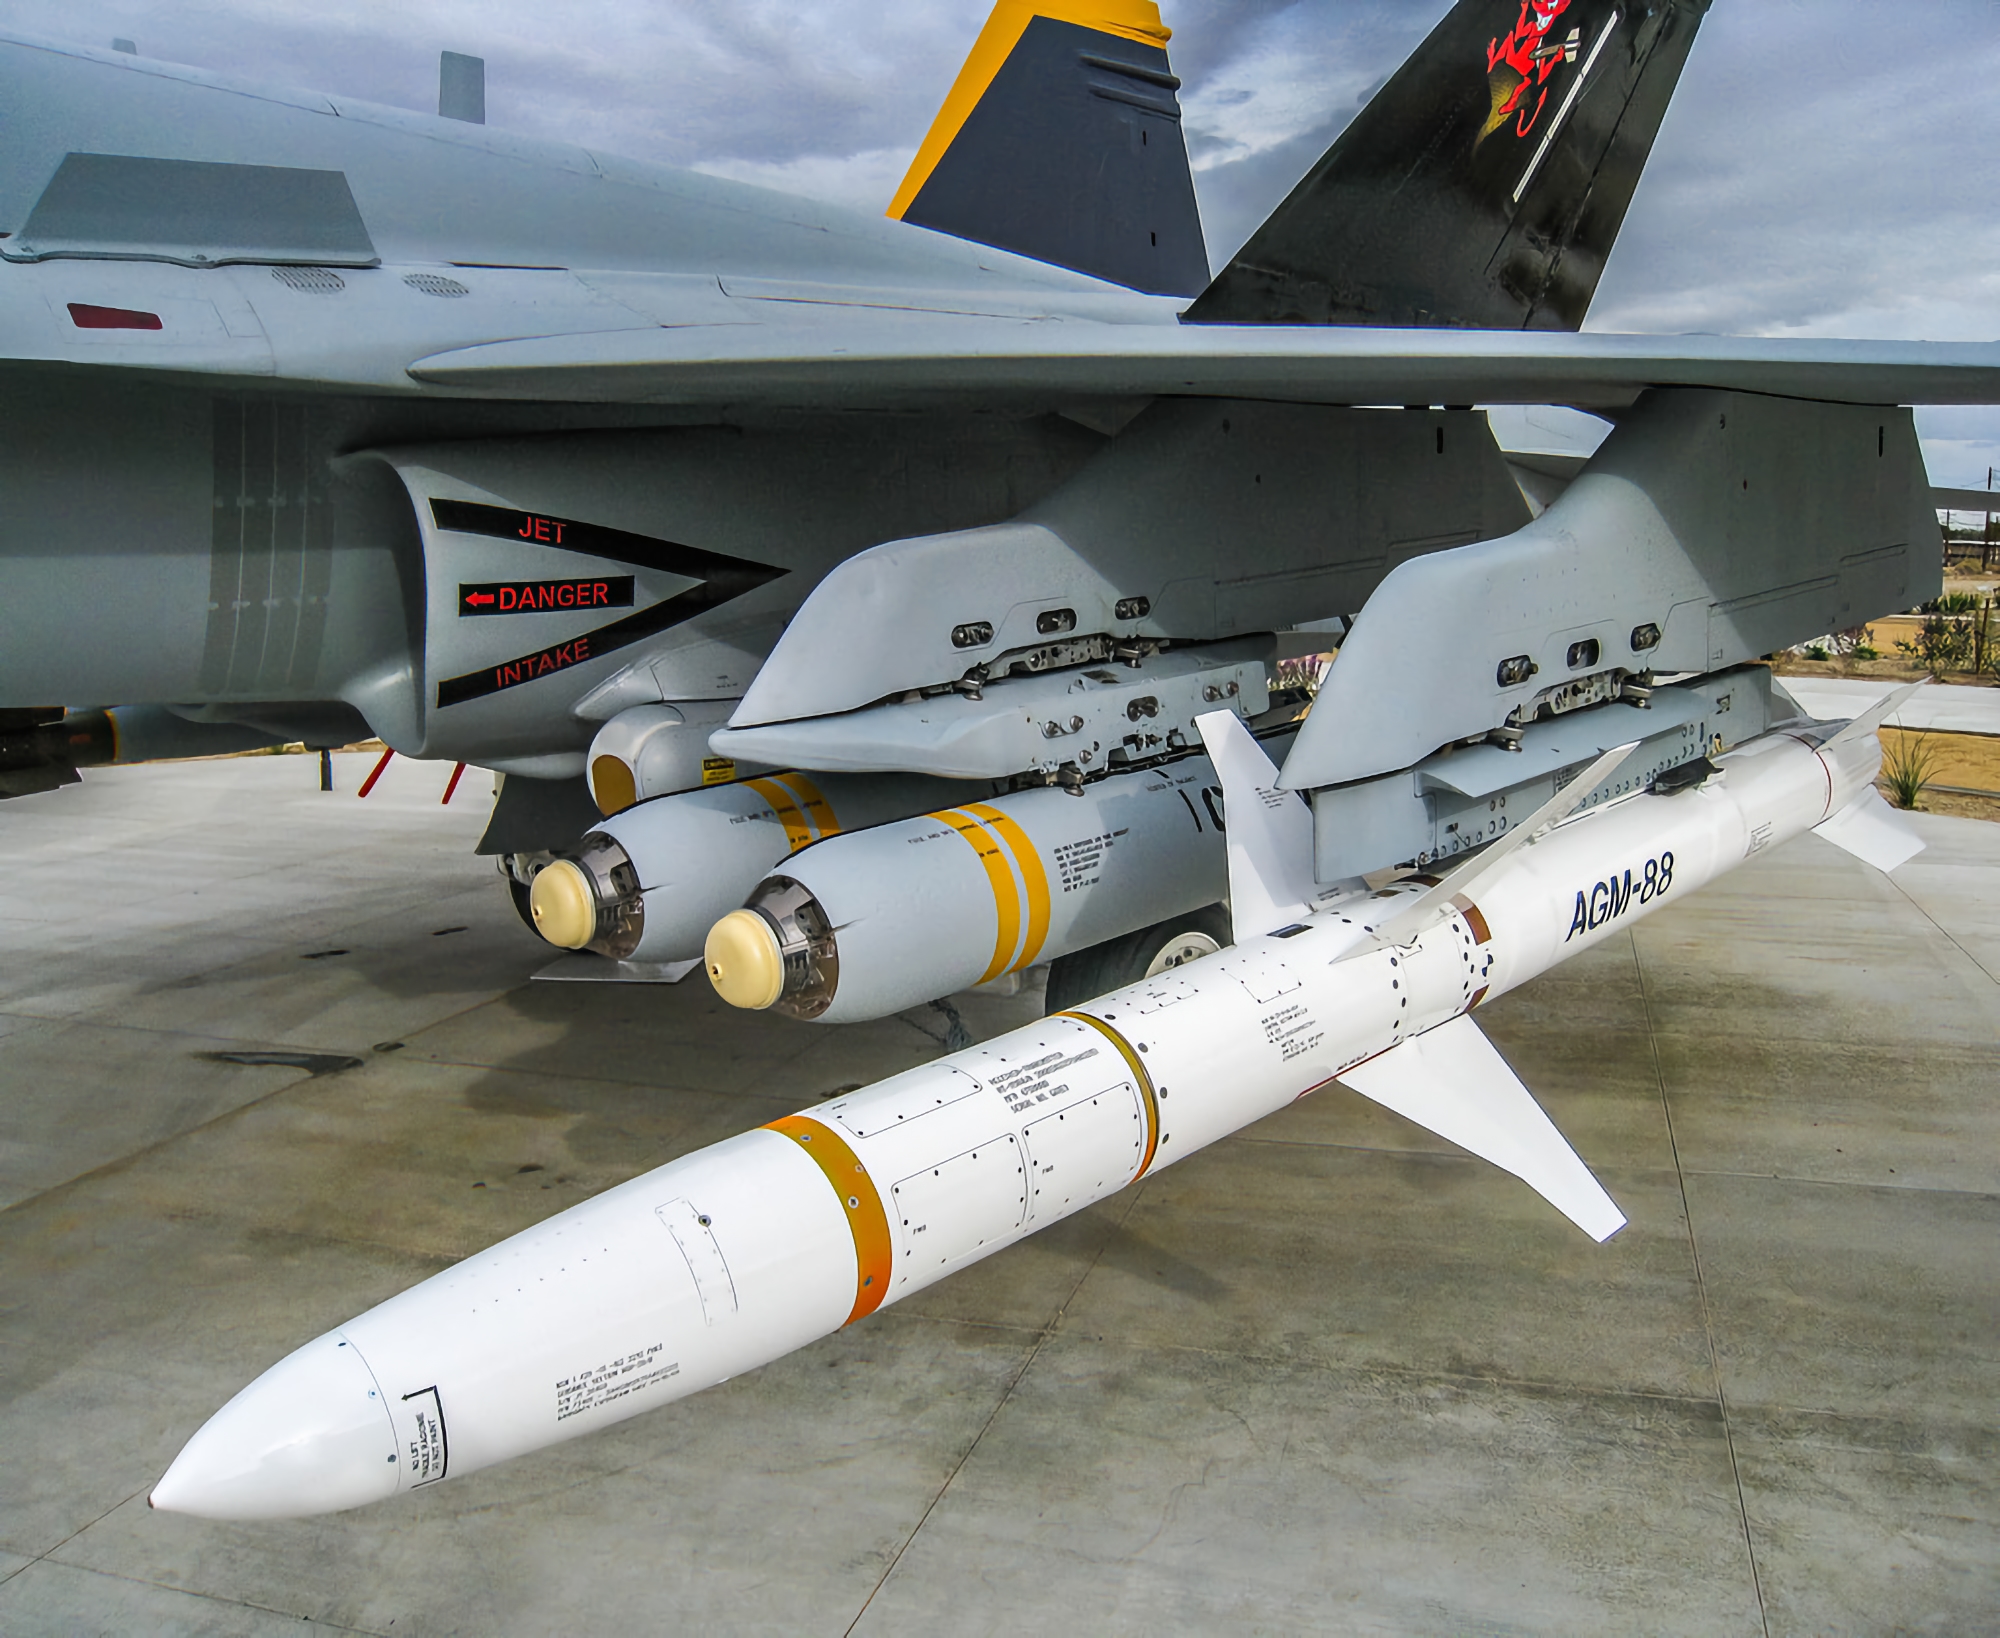 The AFU uses American AGM-88 HARM anti-radar missiles, which can destroy targets up to 150 km away